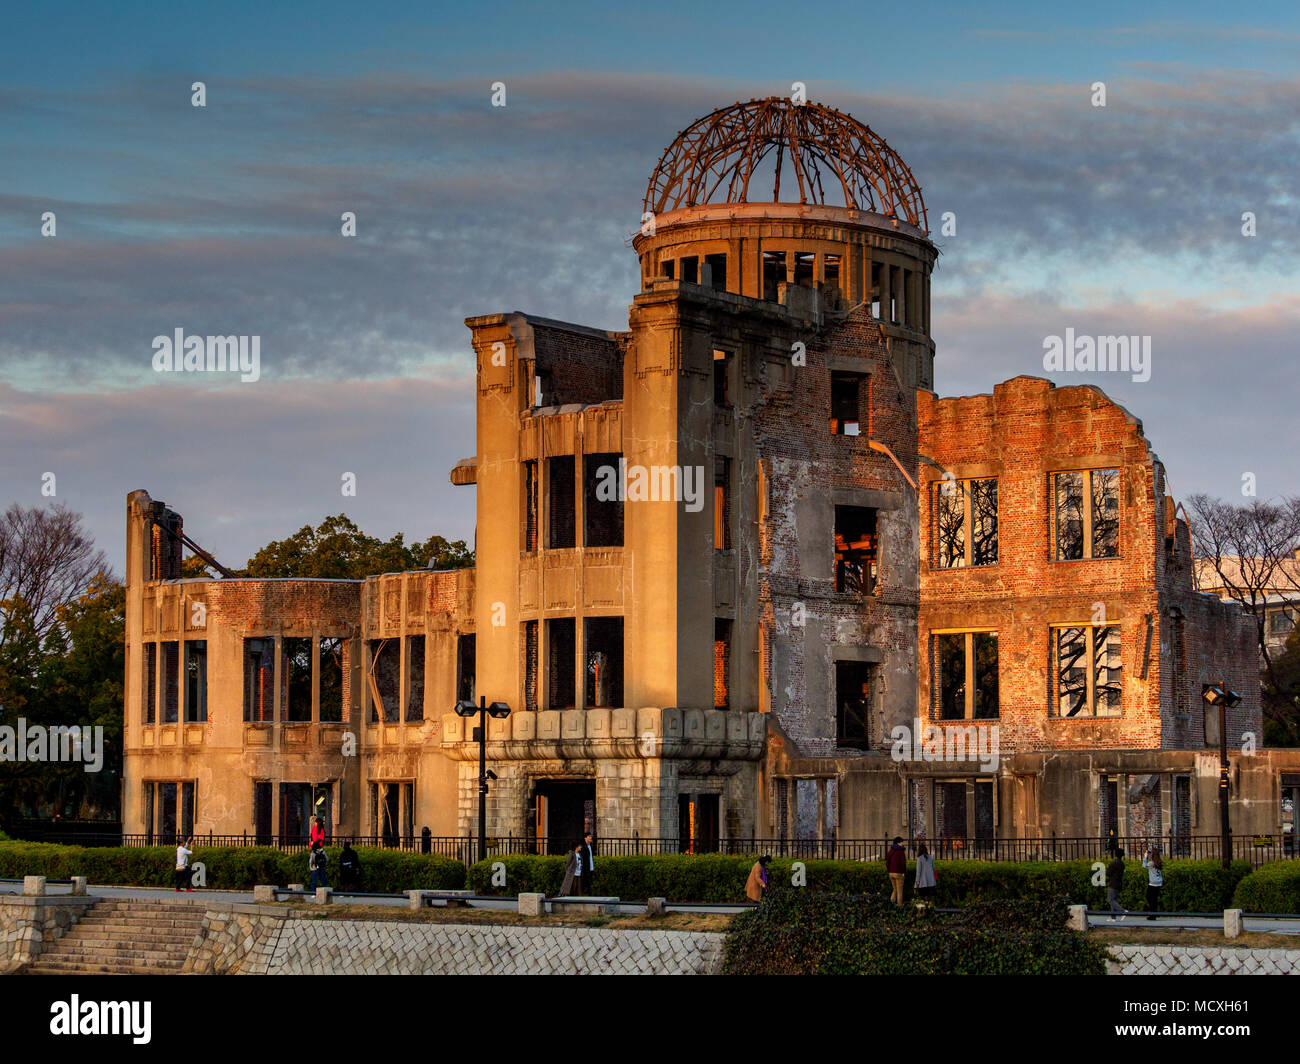 Hiroshima A-Bomb Dome Japan, the Product Exhibition Hall building was designed by the Czech architect Jan Letzel now the Hiroshima Peace Memorial Dome Stock Photo